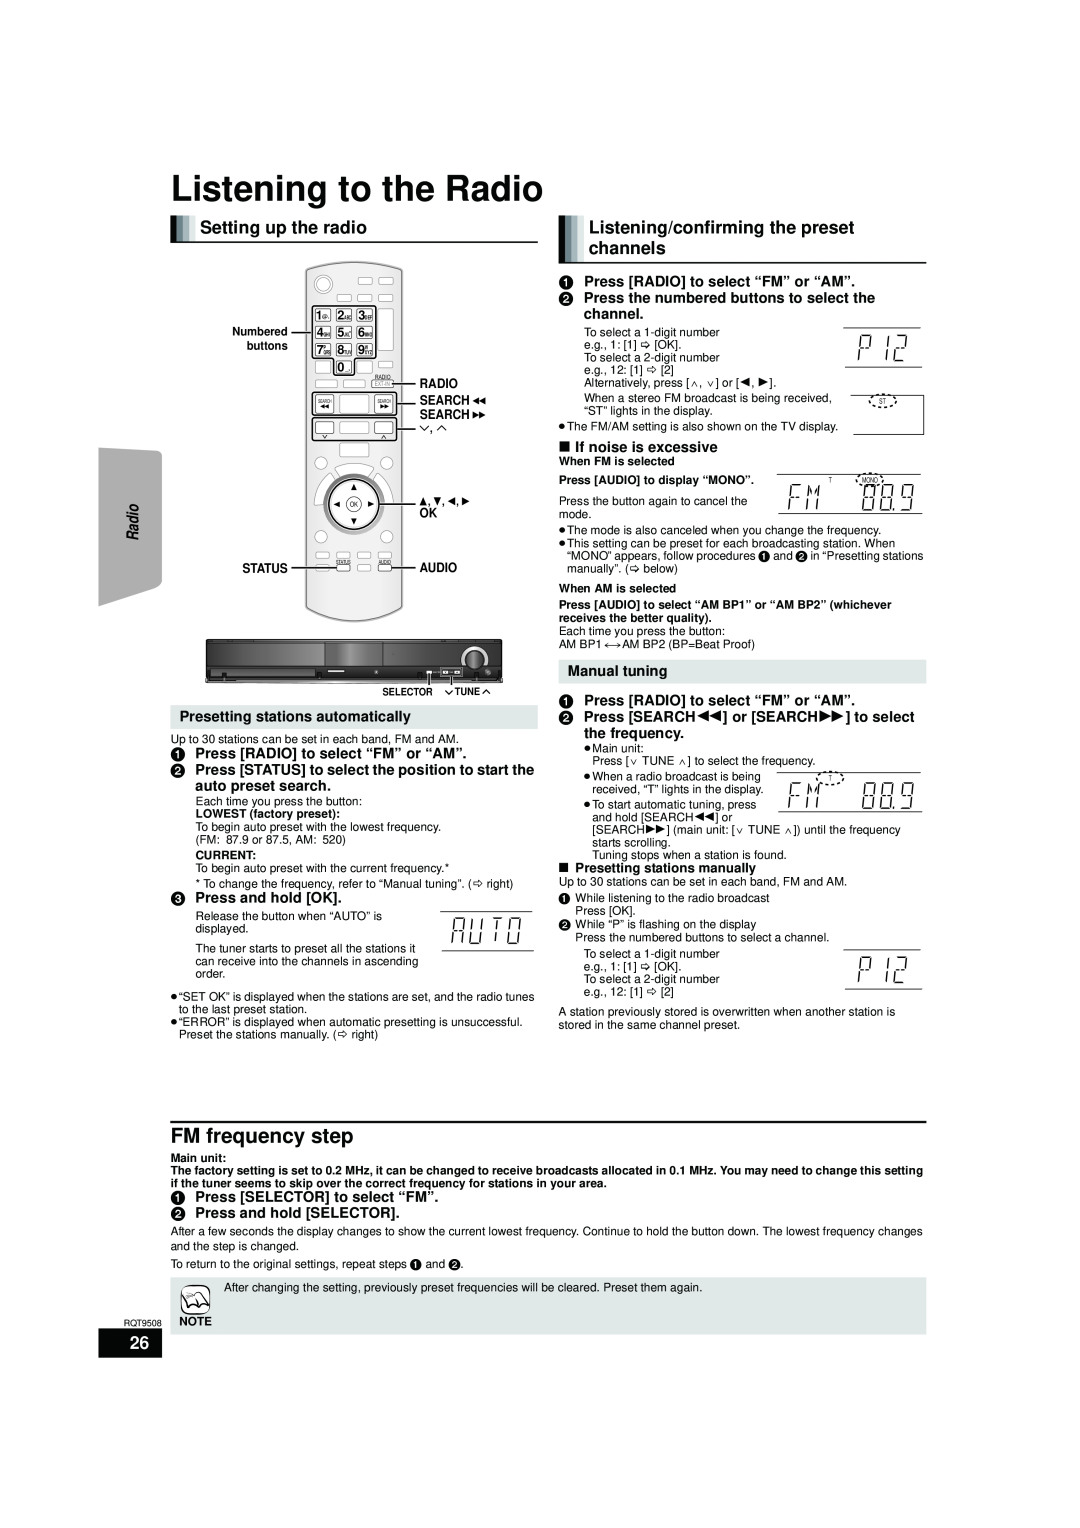 Panasonic SC-BT203 Listening to the Radio, FM frequency step, Setting up the radio, Press RADIO to select “FM” or “AM” 